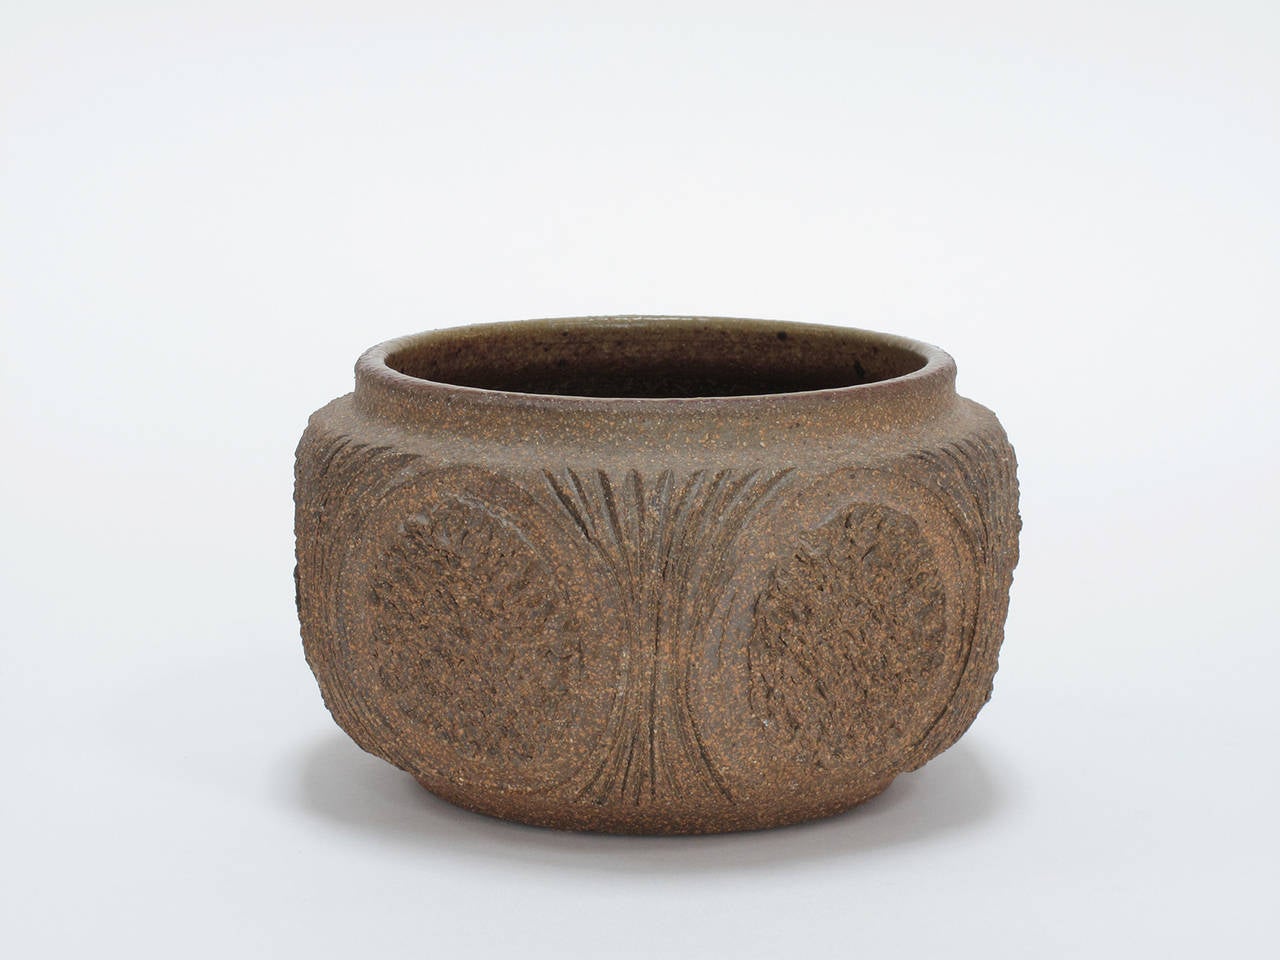 Stoneware vessel with an unglazed, hand-incised exterior design and a speckled, ochre-moss glazed interior, made by Robert Maxwell, California, 1960s, signed by the artist.